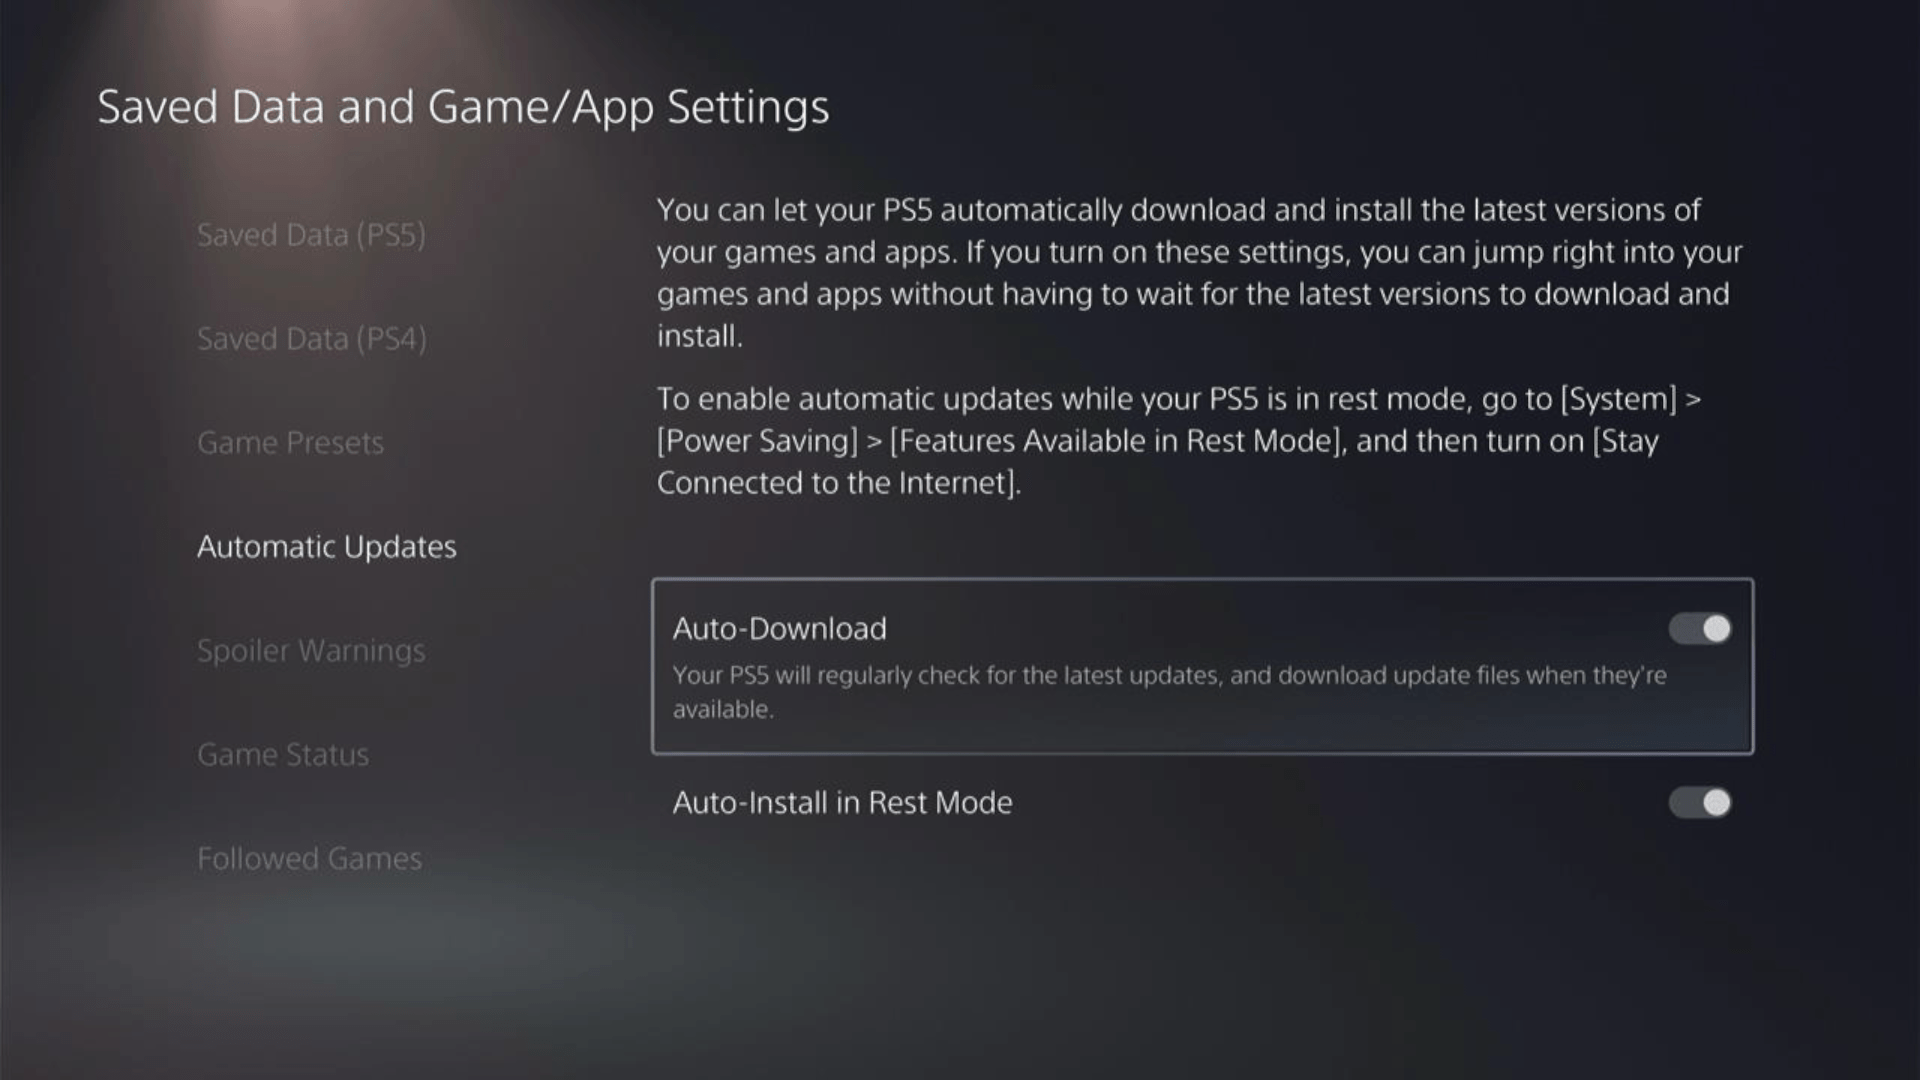 In the Saved Data and Game/App Settings window, select Automatic Updates from the left sidebar to enable automatic game updates to avoid freezing